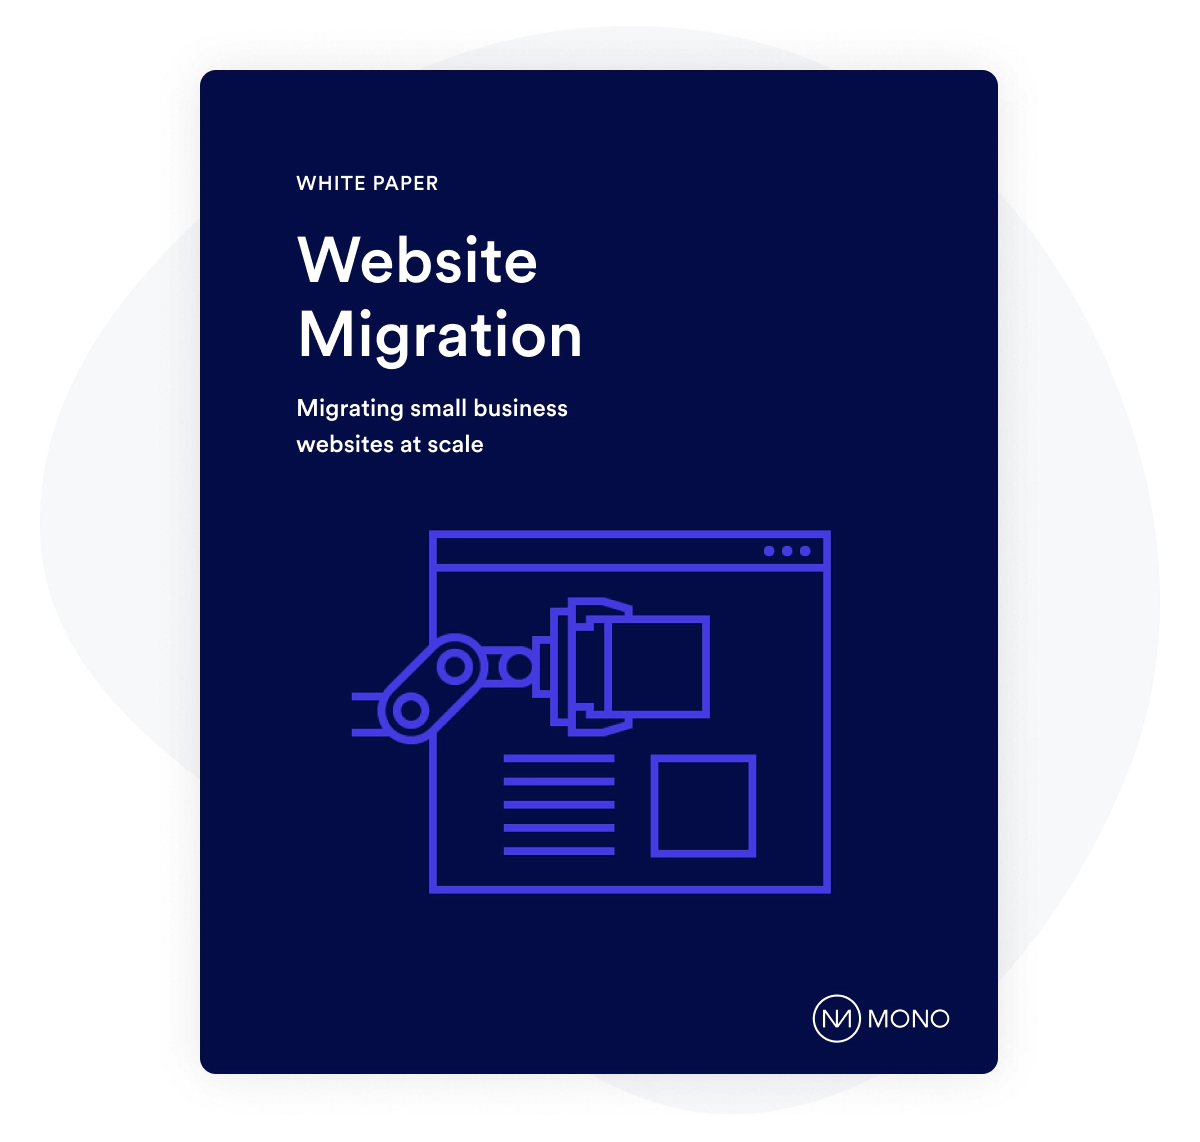 Cover image of the Mono white paper on migrating small business websites at scale.